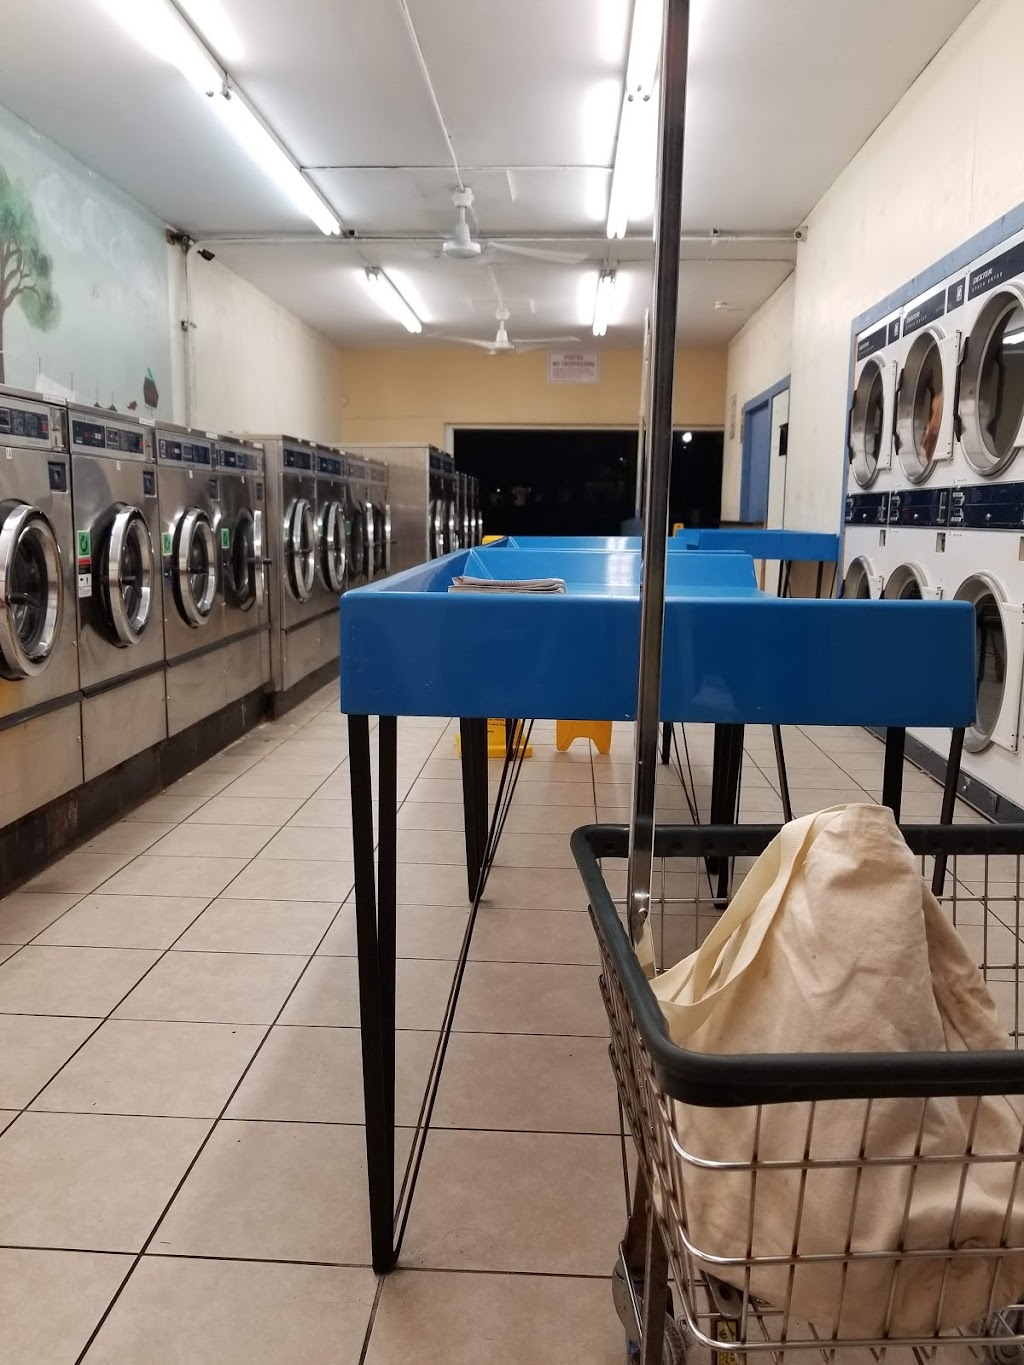 24 Hour Laundromat Highland Ave | 1232 S Highland Ave, Clearwater, FL 33756 | Phone: (321) 527-8521